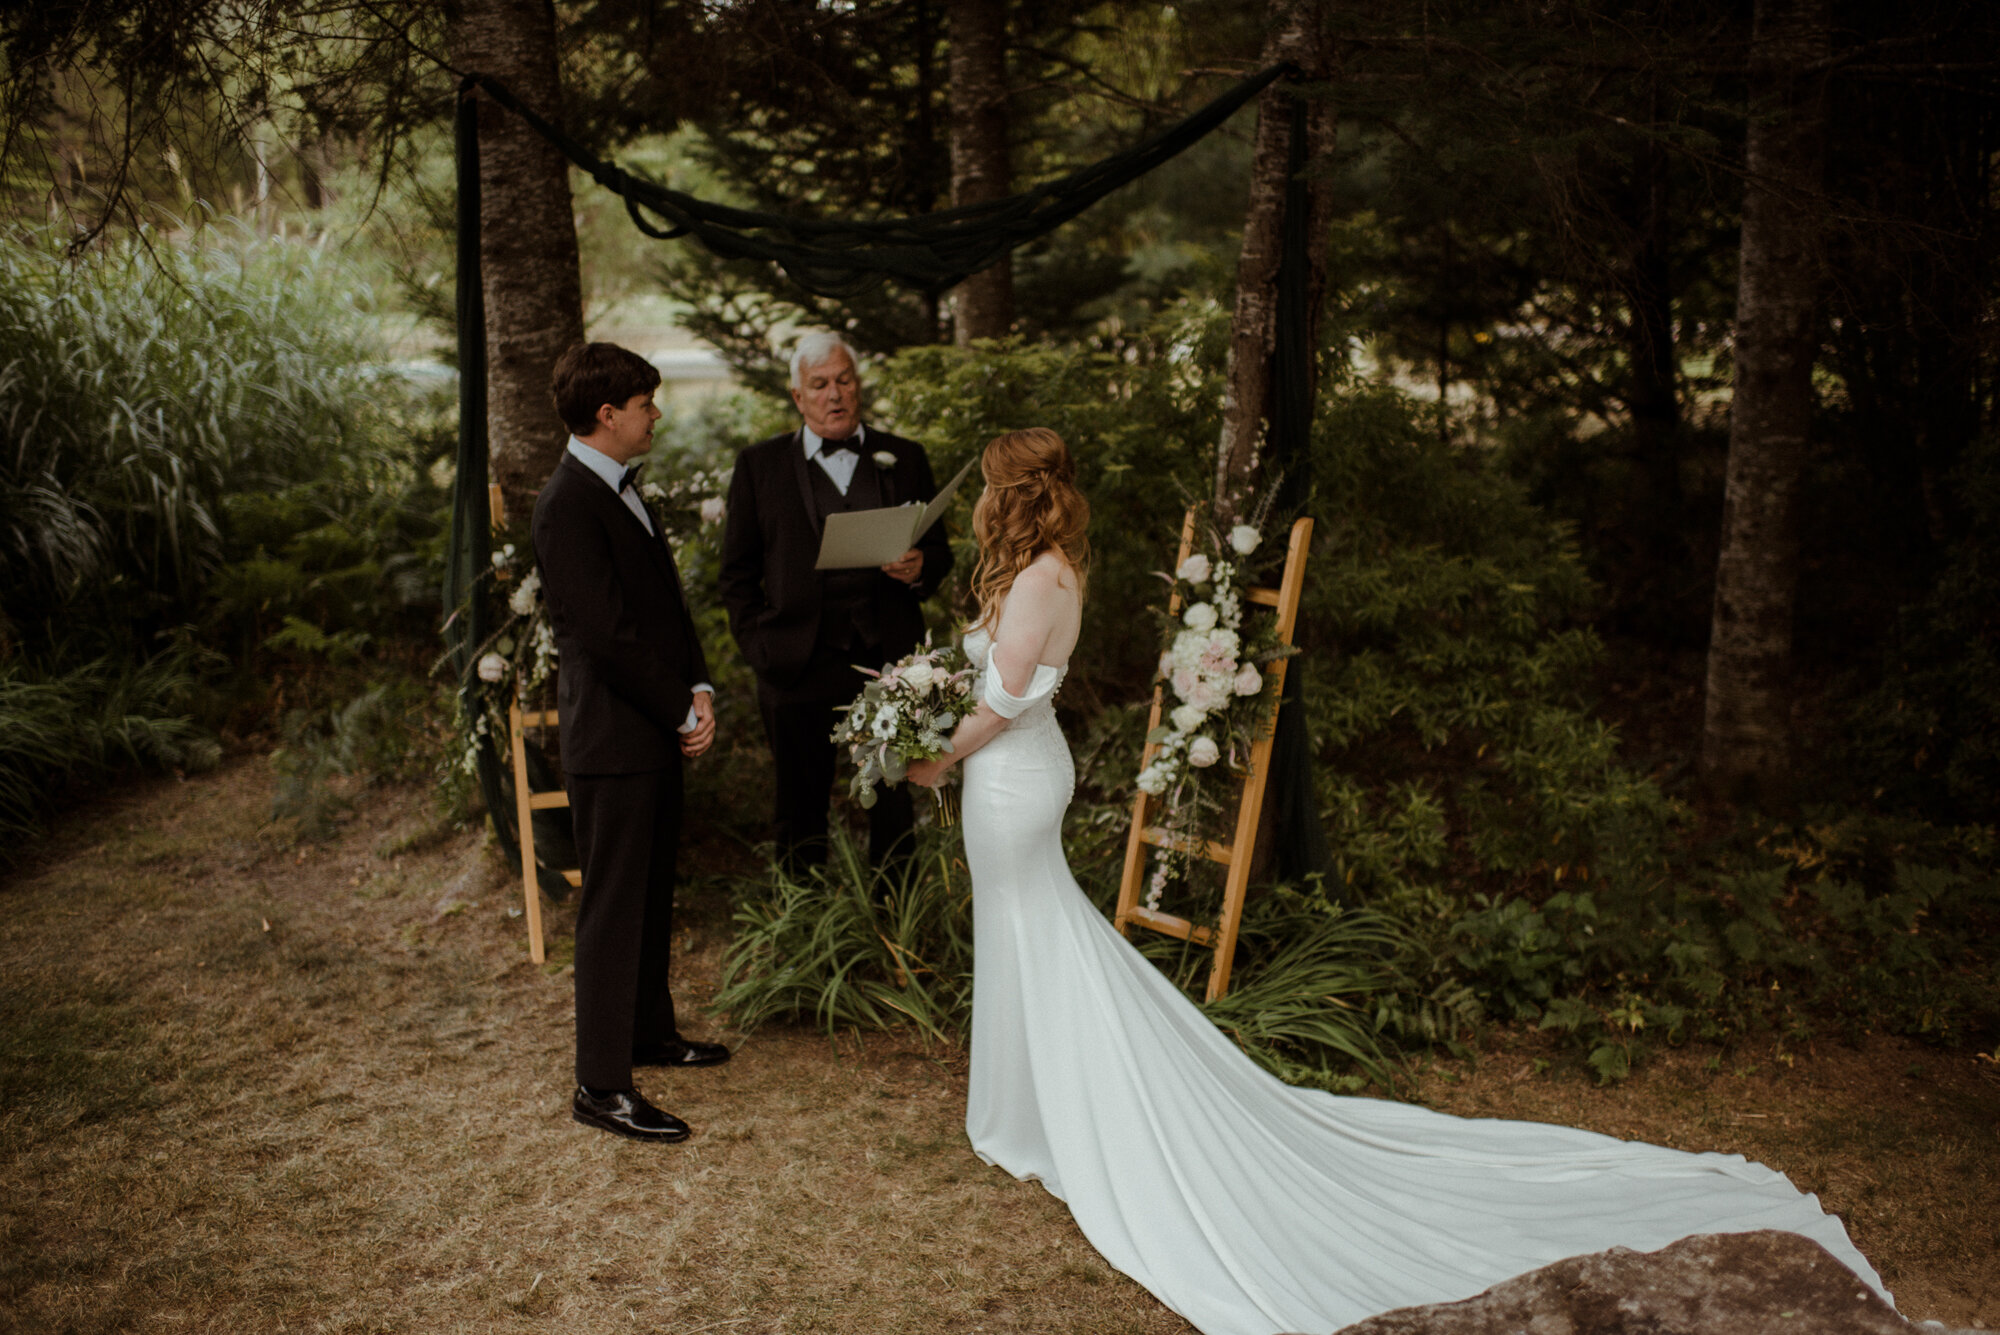 Autumn Elopement in New Hampshire - Backyard Wedding during COVID and Sunrise Hike in Wedding Dress - White Sails Creative_50.jpg